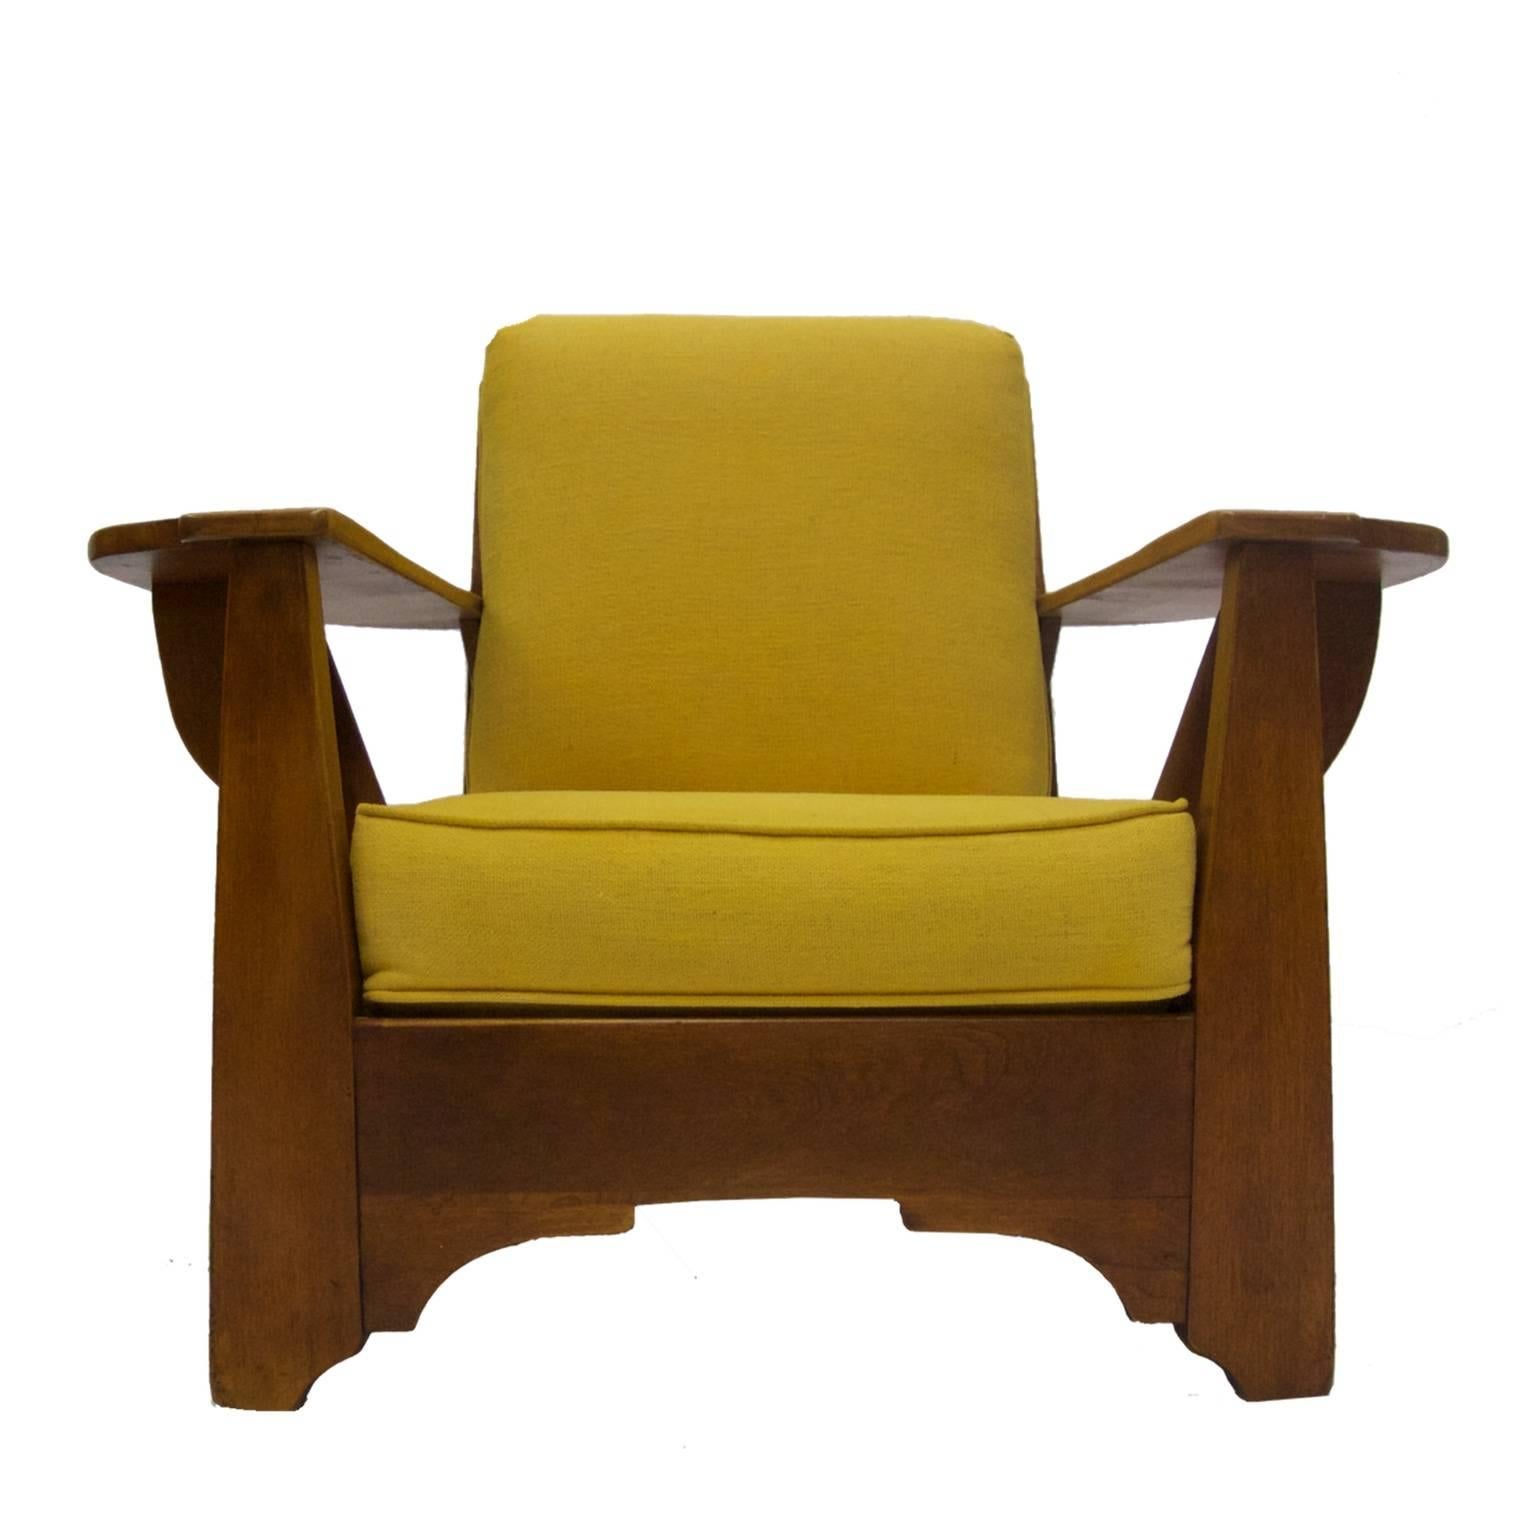 Beautiful solid hard rock maple lounge chair designed by Herman de Vries for Cushman. Very heavy and comfortable Adirondack style Cushman lounge chair.